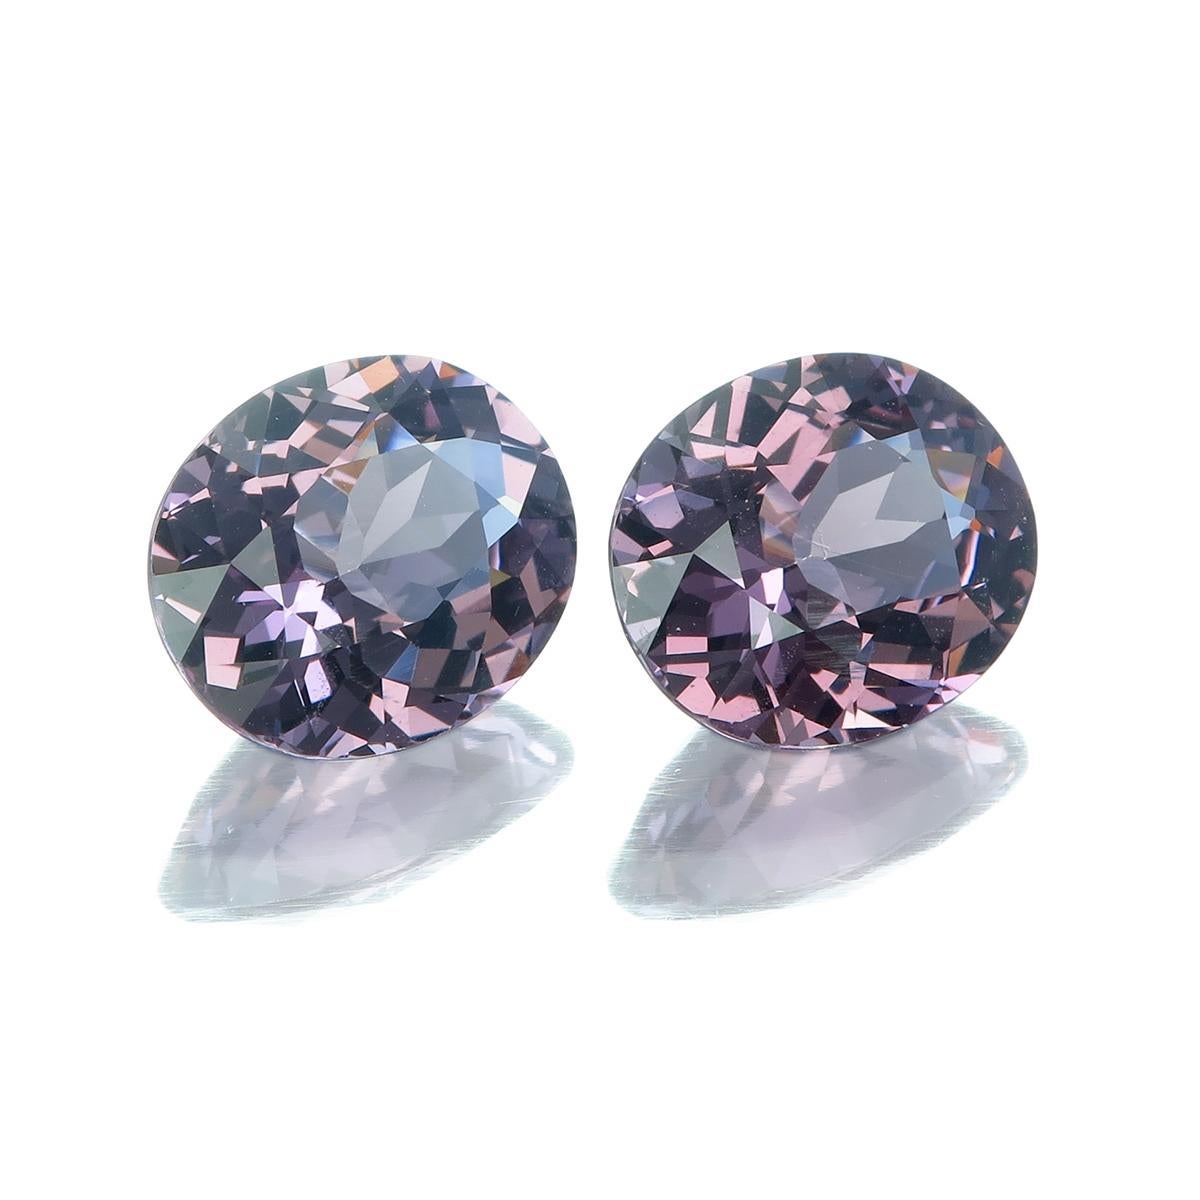 Pair of lovely sparkling Purple Spinels at 2.57 & 2.52 carat; total of 5.09 carat.
We can make a pair of beautiful unique earrings for you, let us know your design and we will create a pair of one-of-a-kinds. 
Dimension: 9.44 x 7.95 x 4.73 mm
      